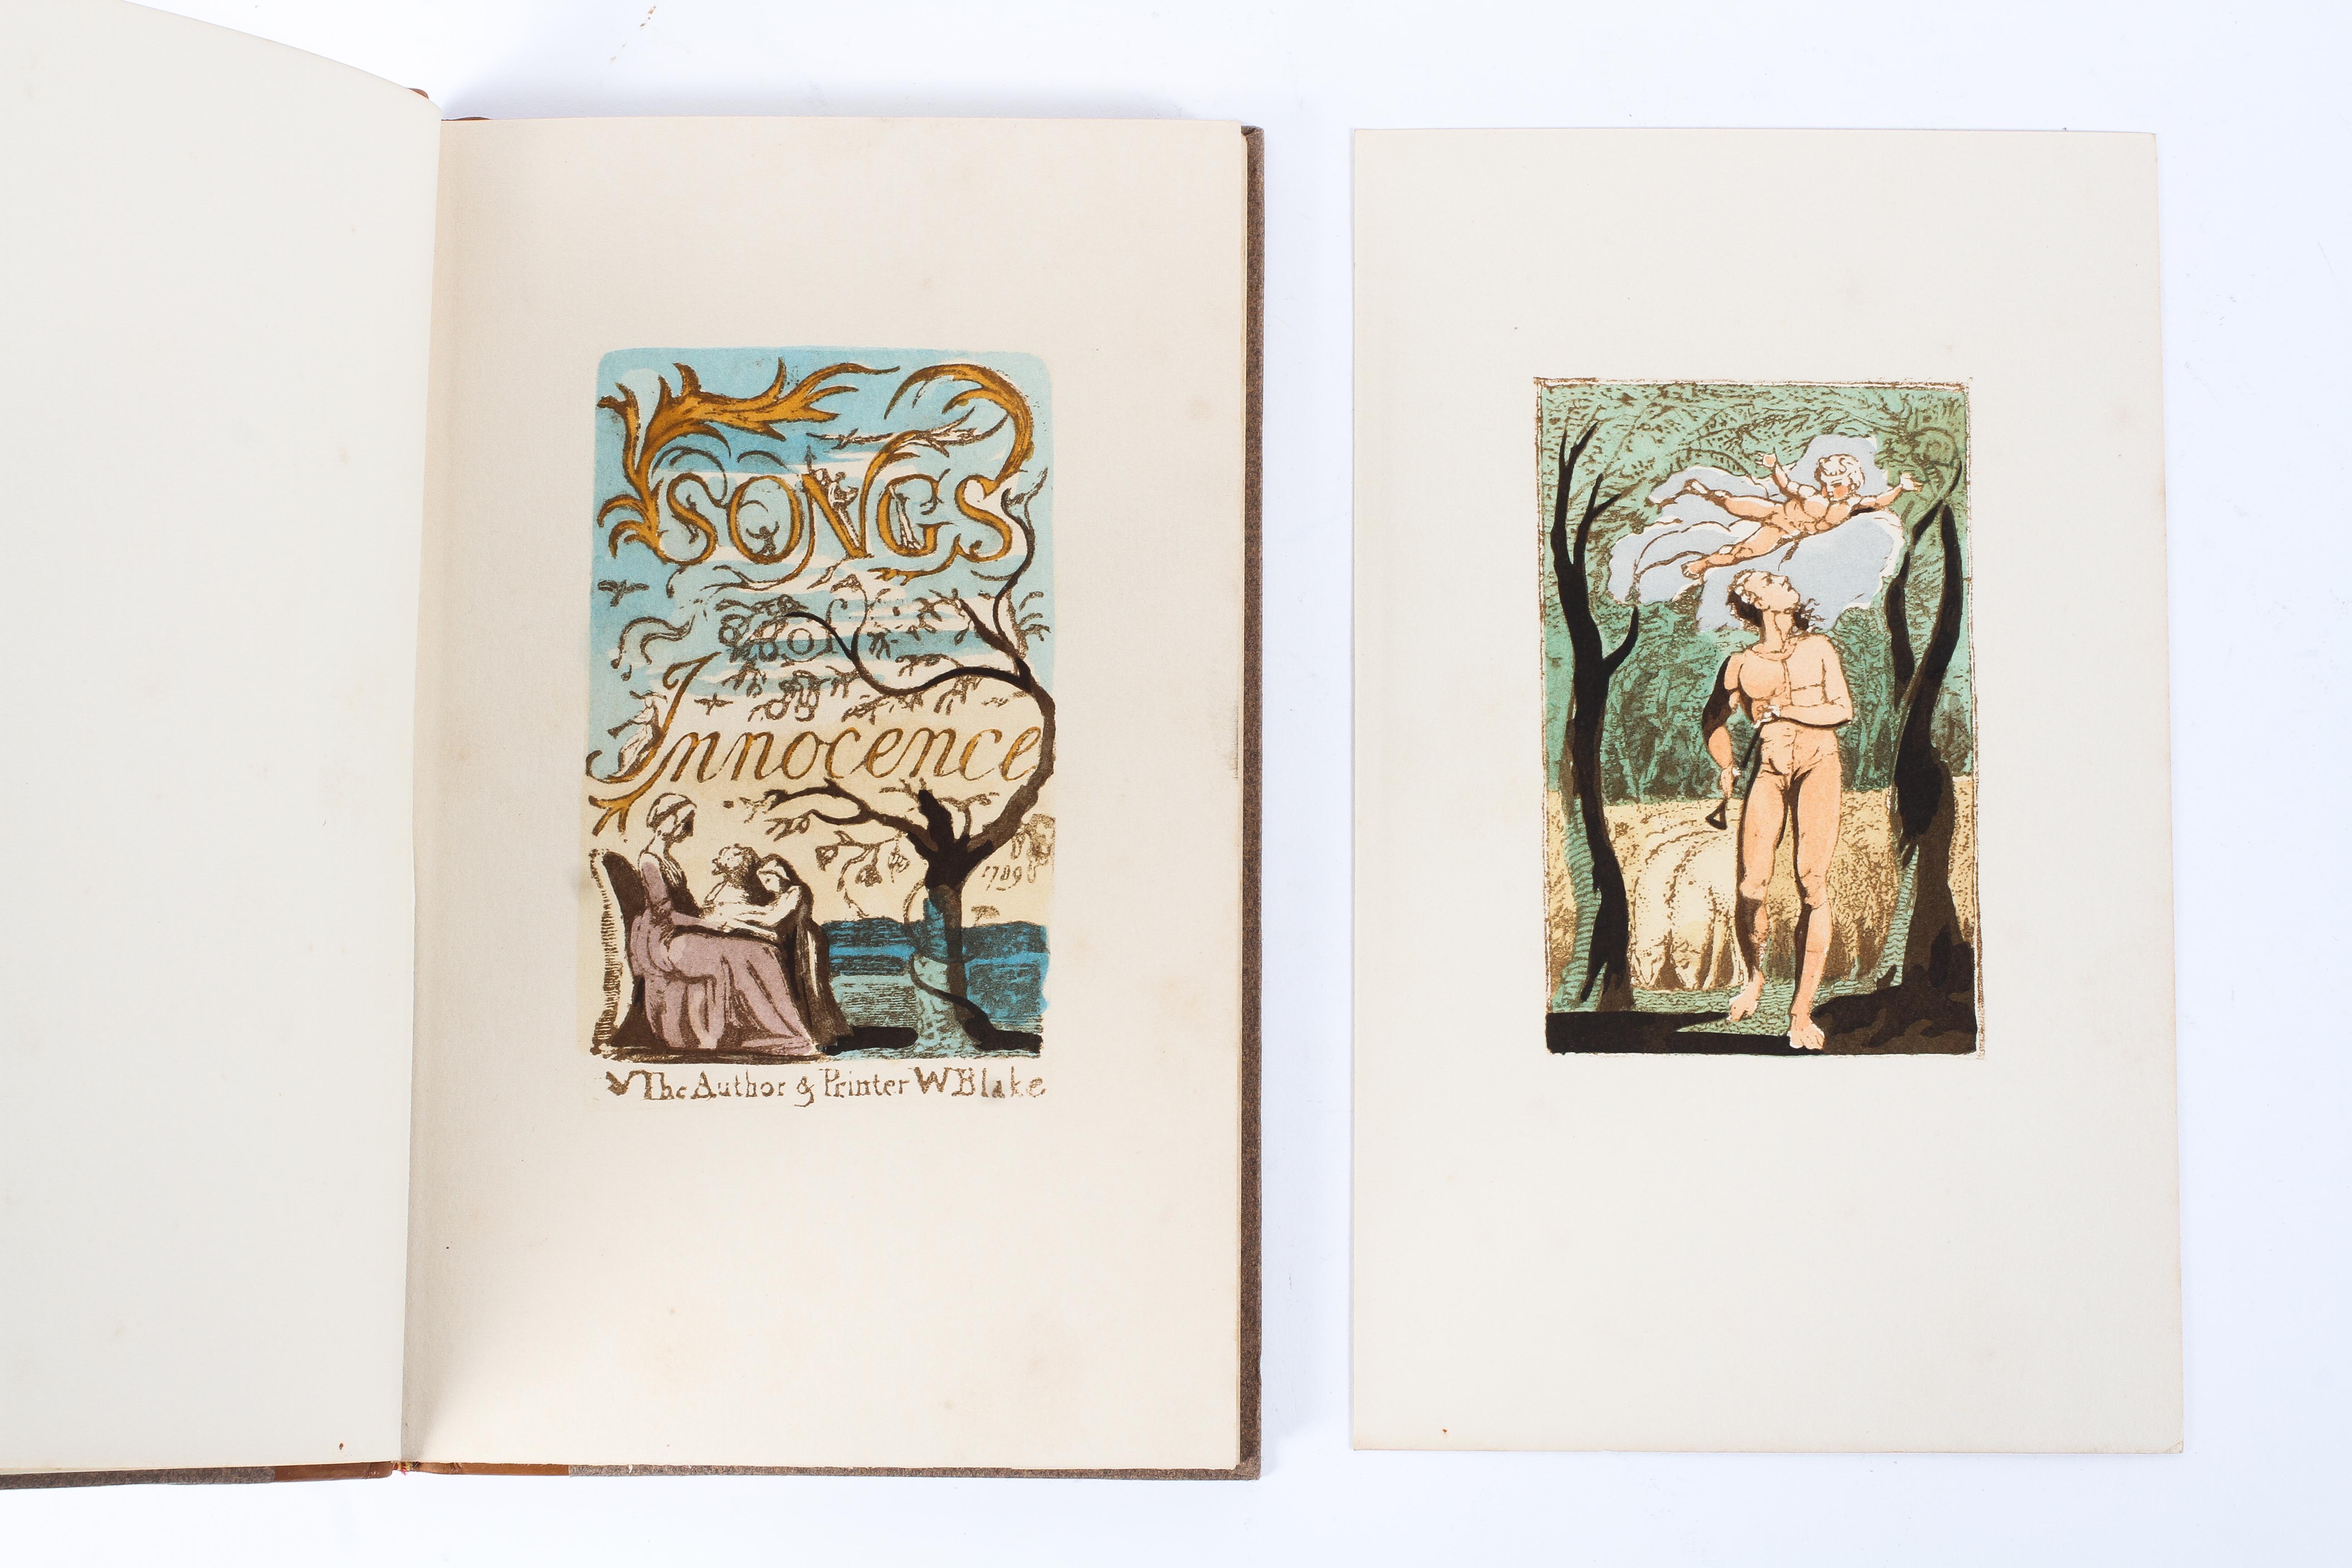 William Blake, Songs of Innocence, The Trianon Press for the William Blake Trust, London, - Image 2 of 3